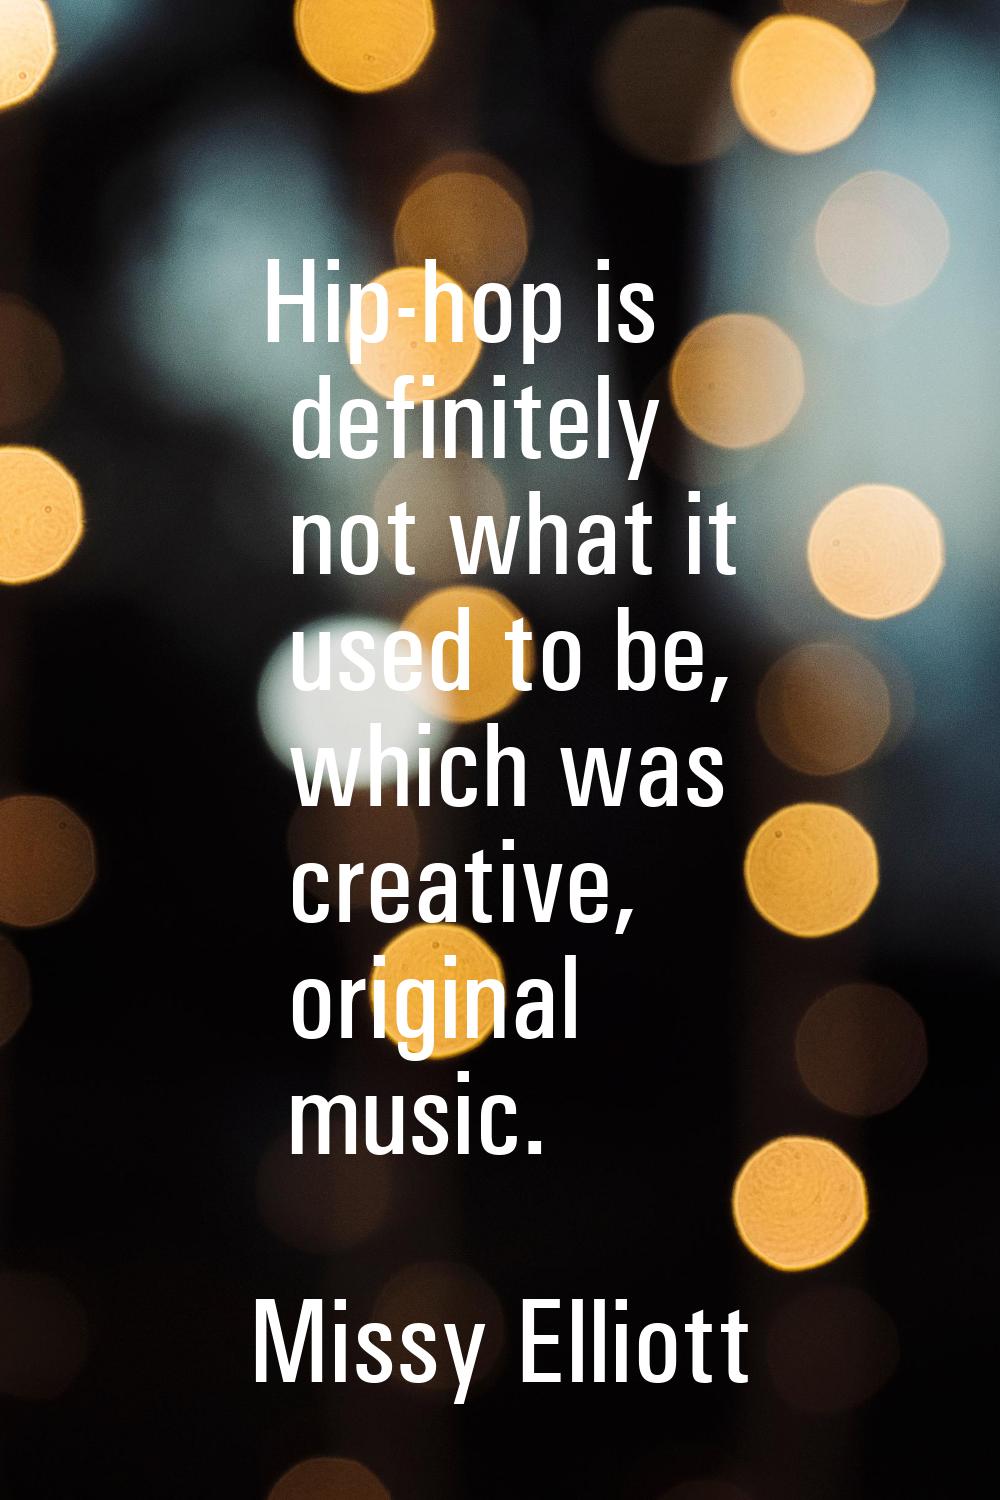 Hip-hop is definitely not what it used to be, which was creative, original music.